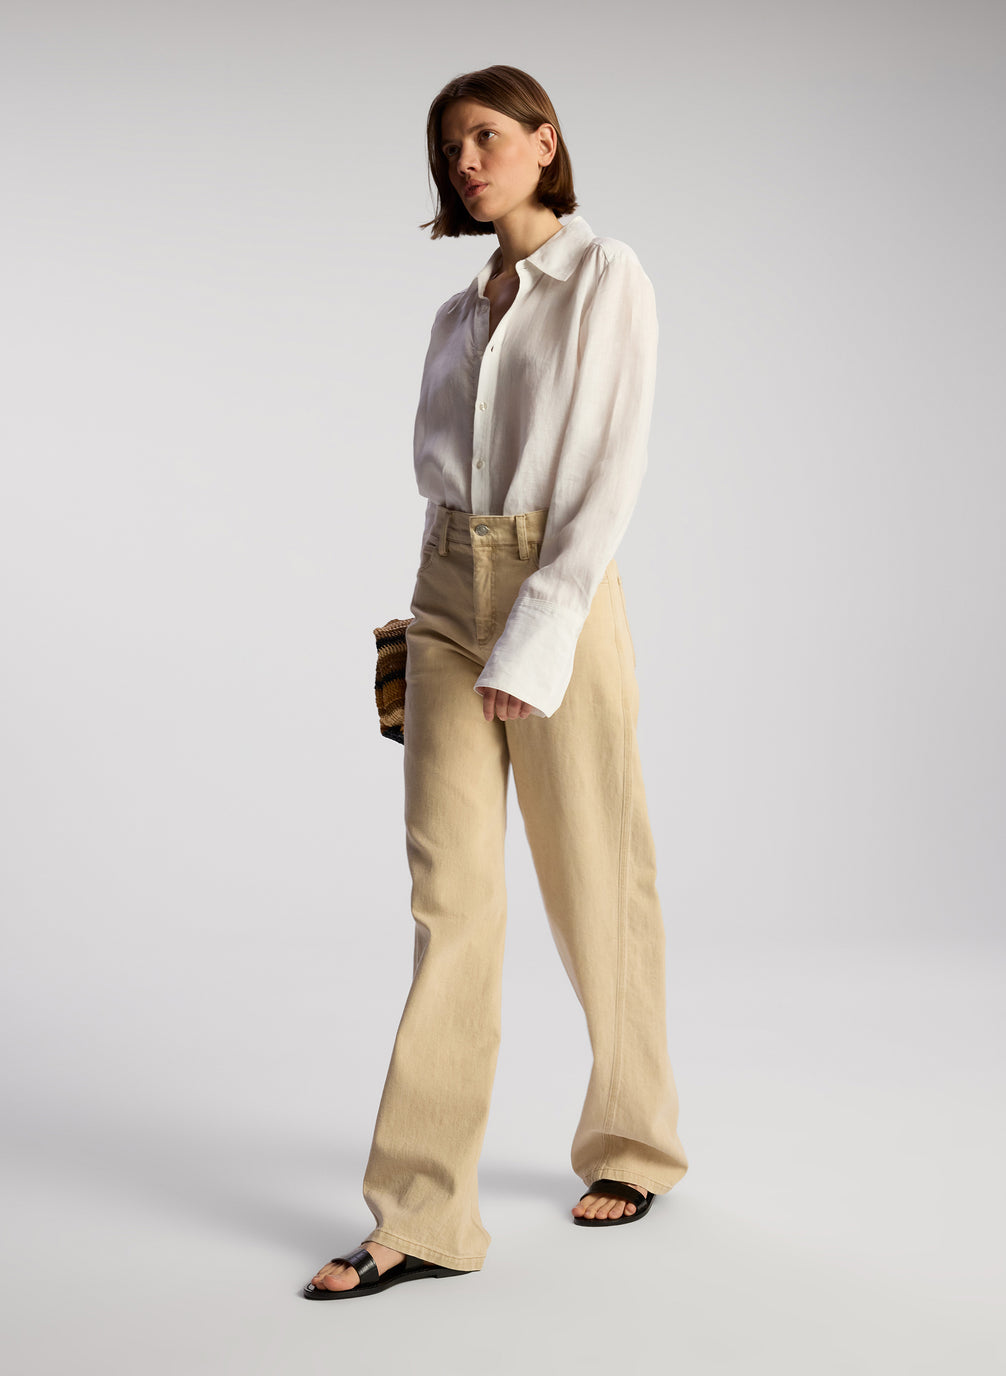 side view of woman wearing white button down shirt and tan pants